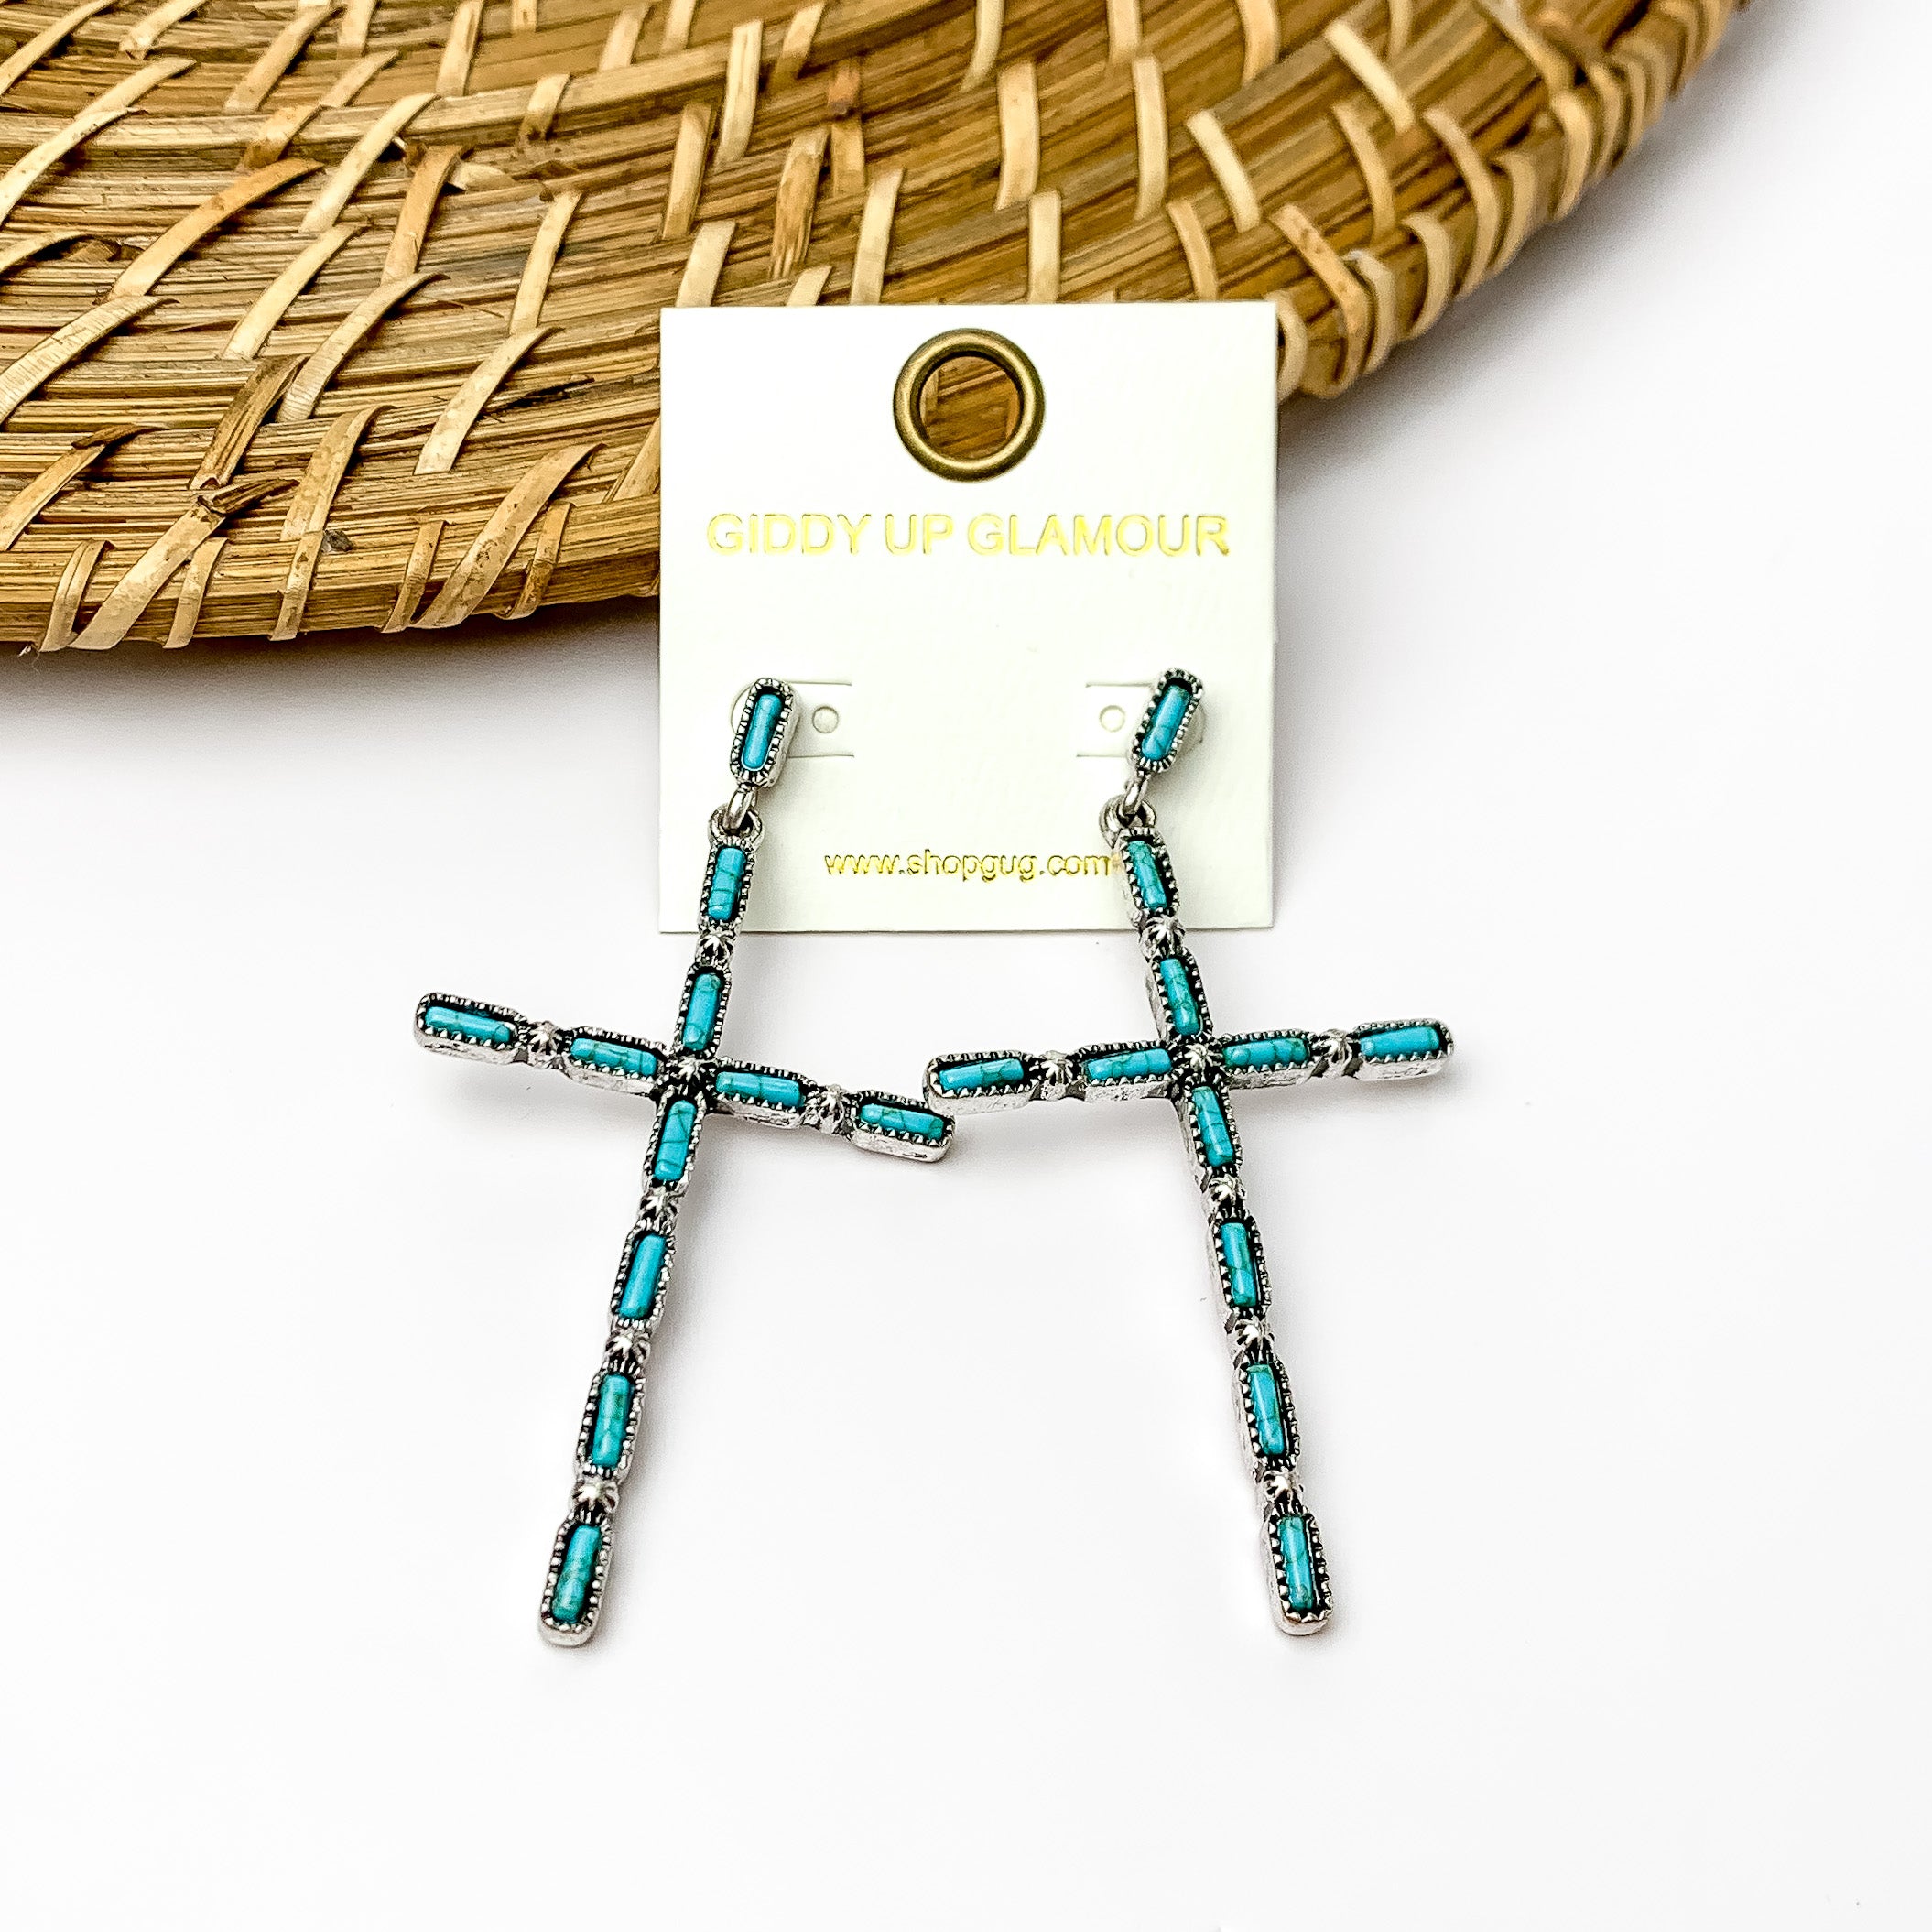 Turquoise and silver tone western cross earrings. Pictured on a white background with a wood like piece at the top.